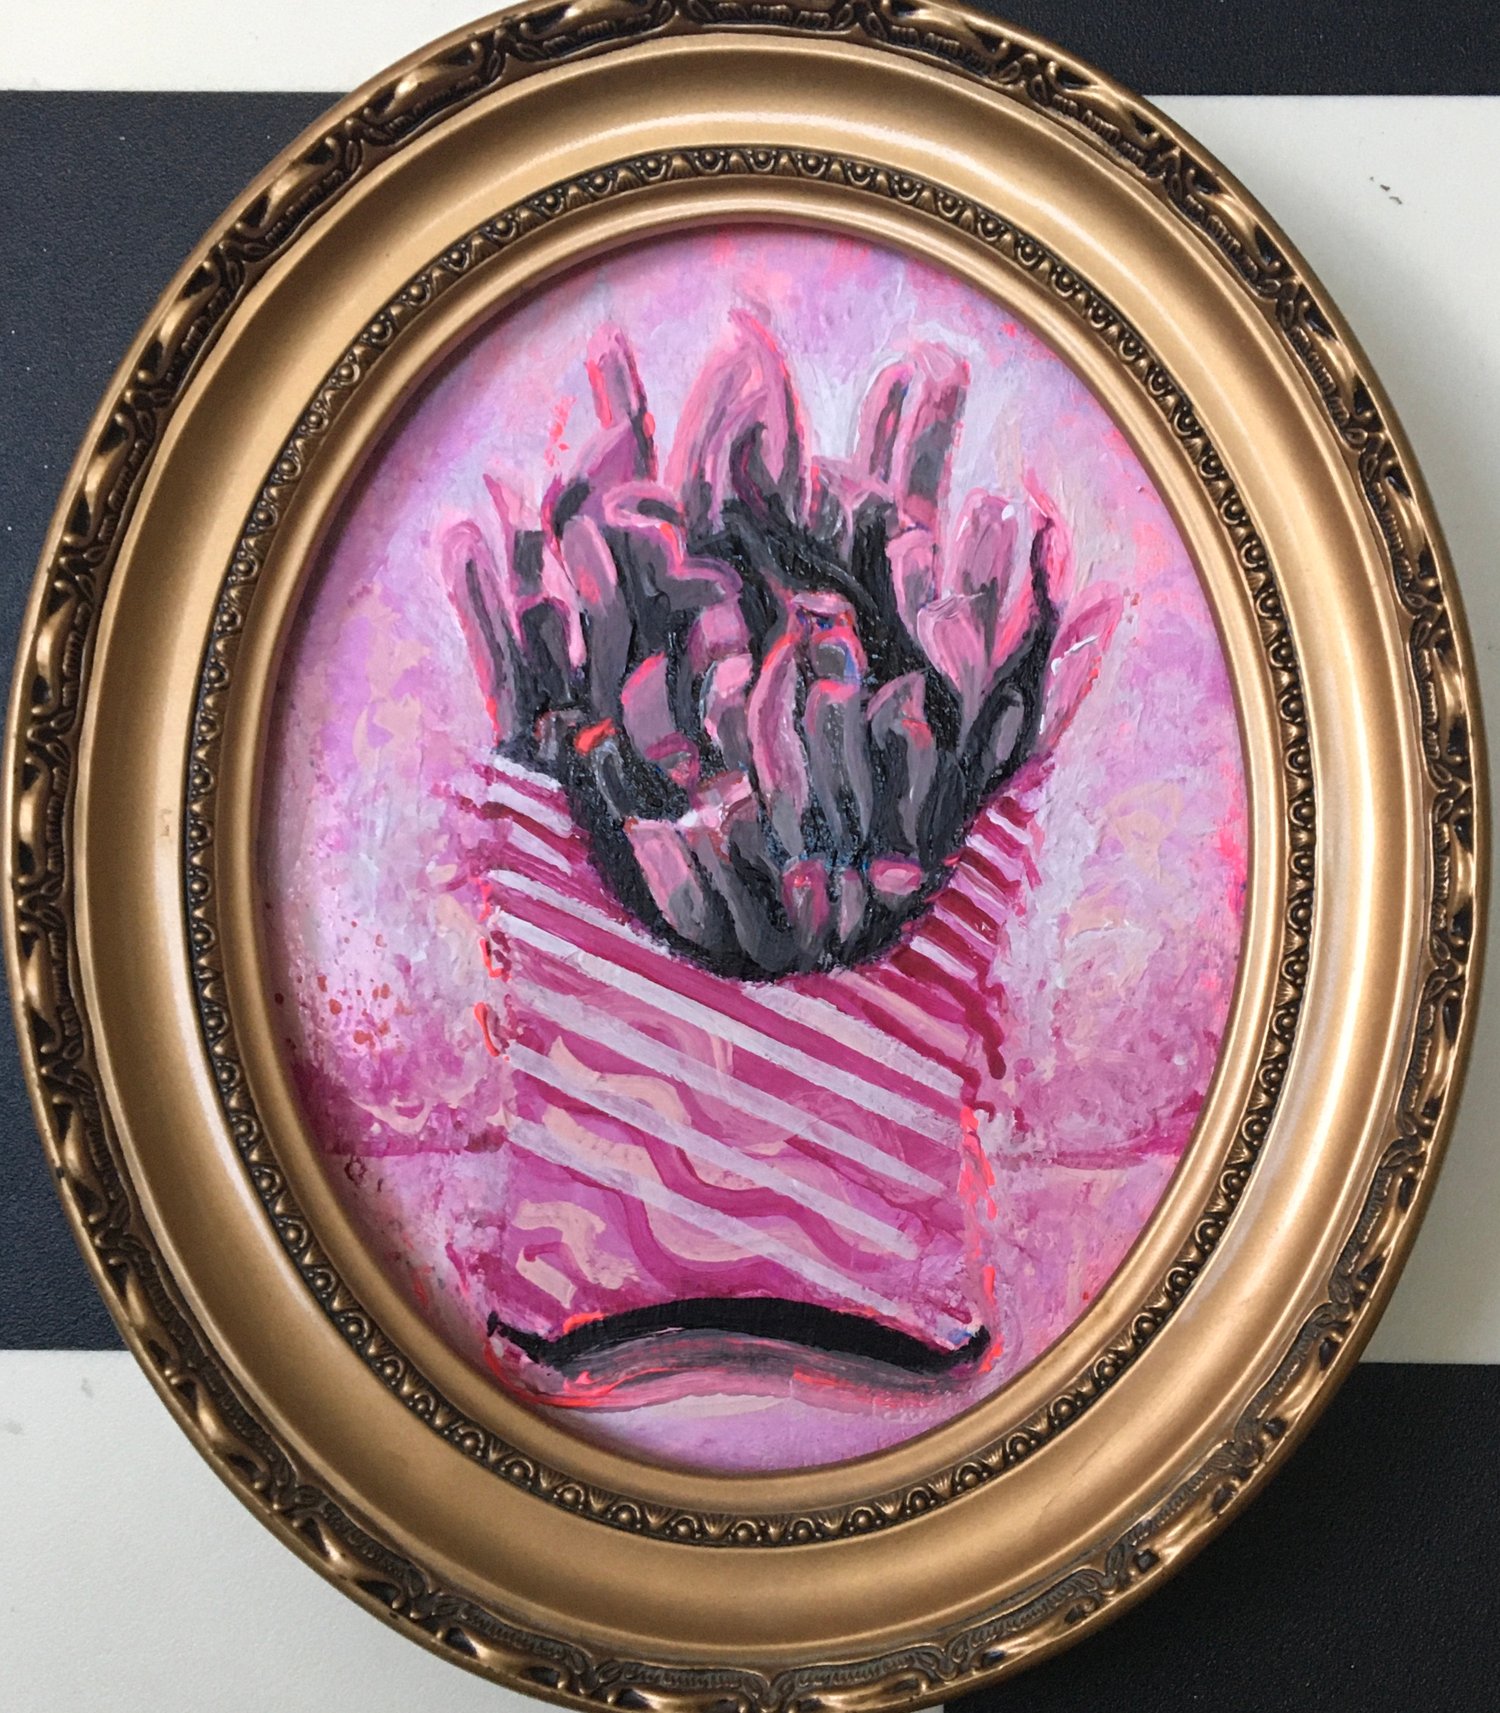 Fries acrylic painting on wooden board framed